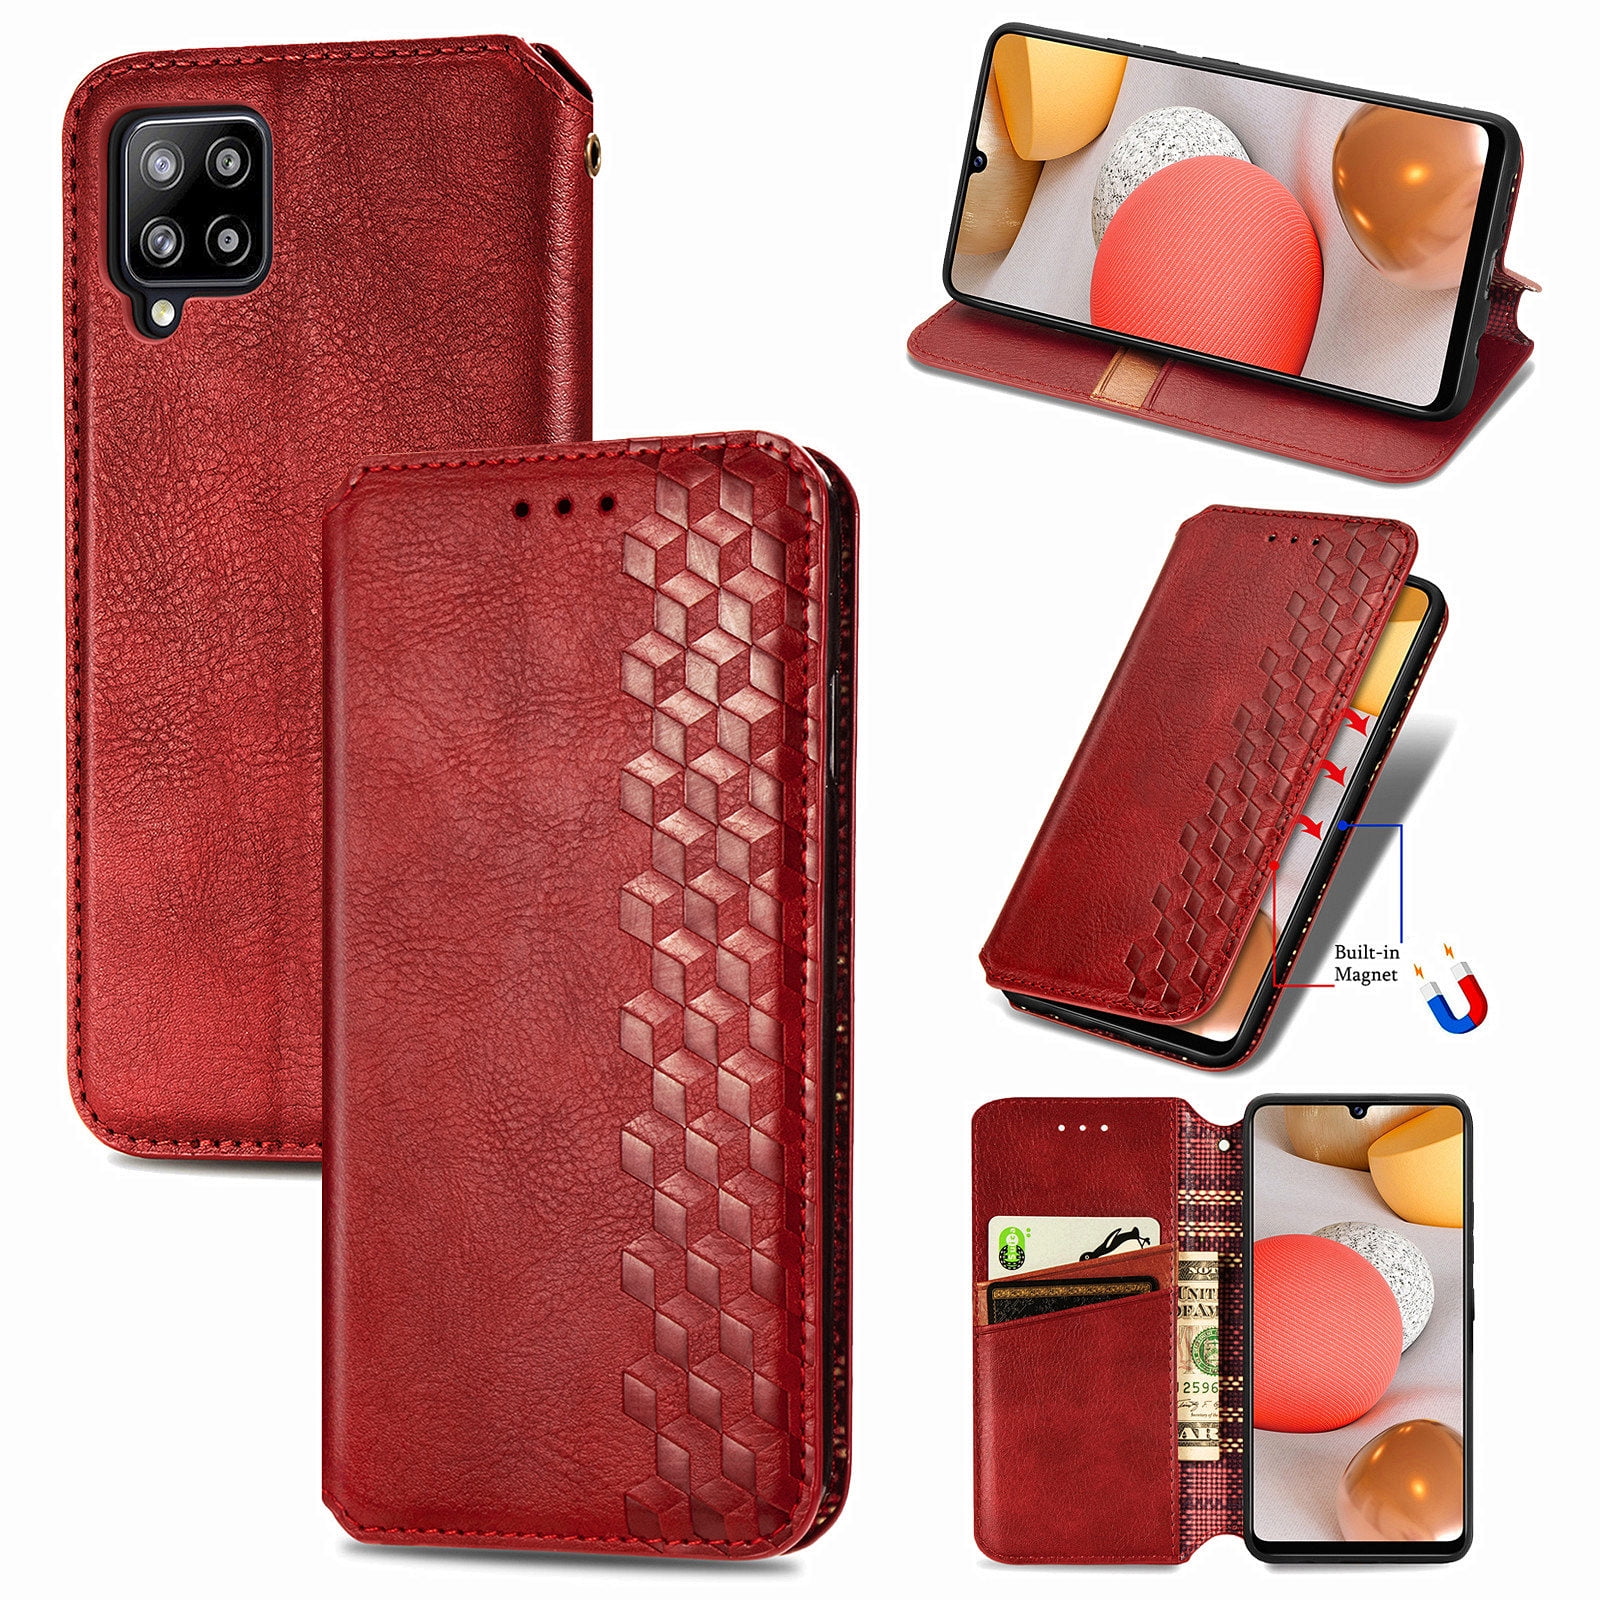 6.6 and Magnetic Closure Full Protection Design Wallet Flip with Case Collection Premium Leather Folio Cover for Samsung Galaxy A42 5G Case Card Slots Kickstand for Galaxy A42 5G Phone Case